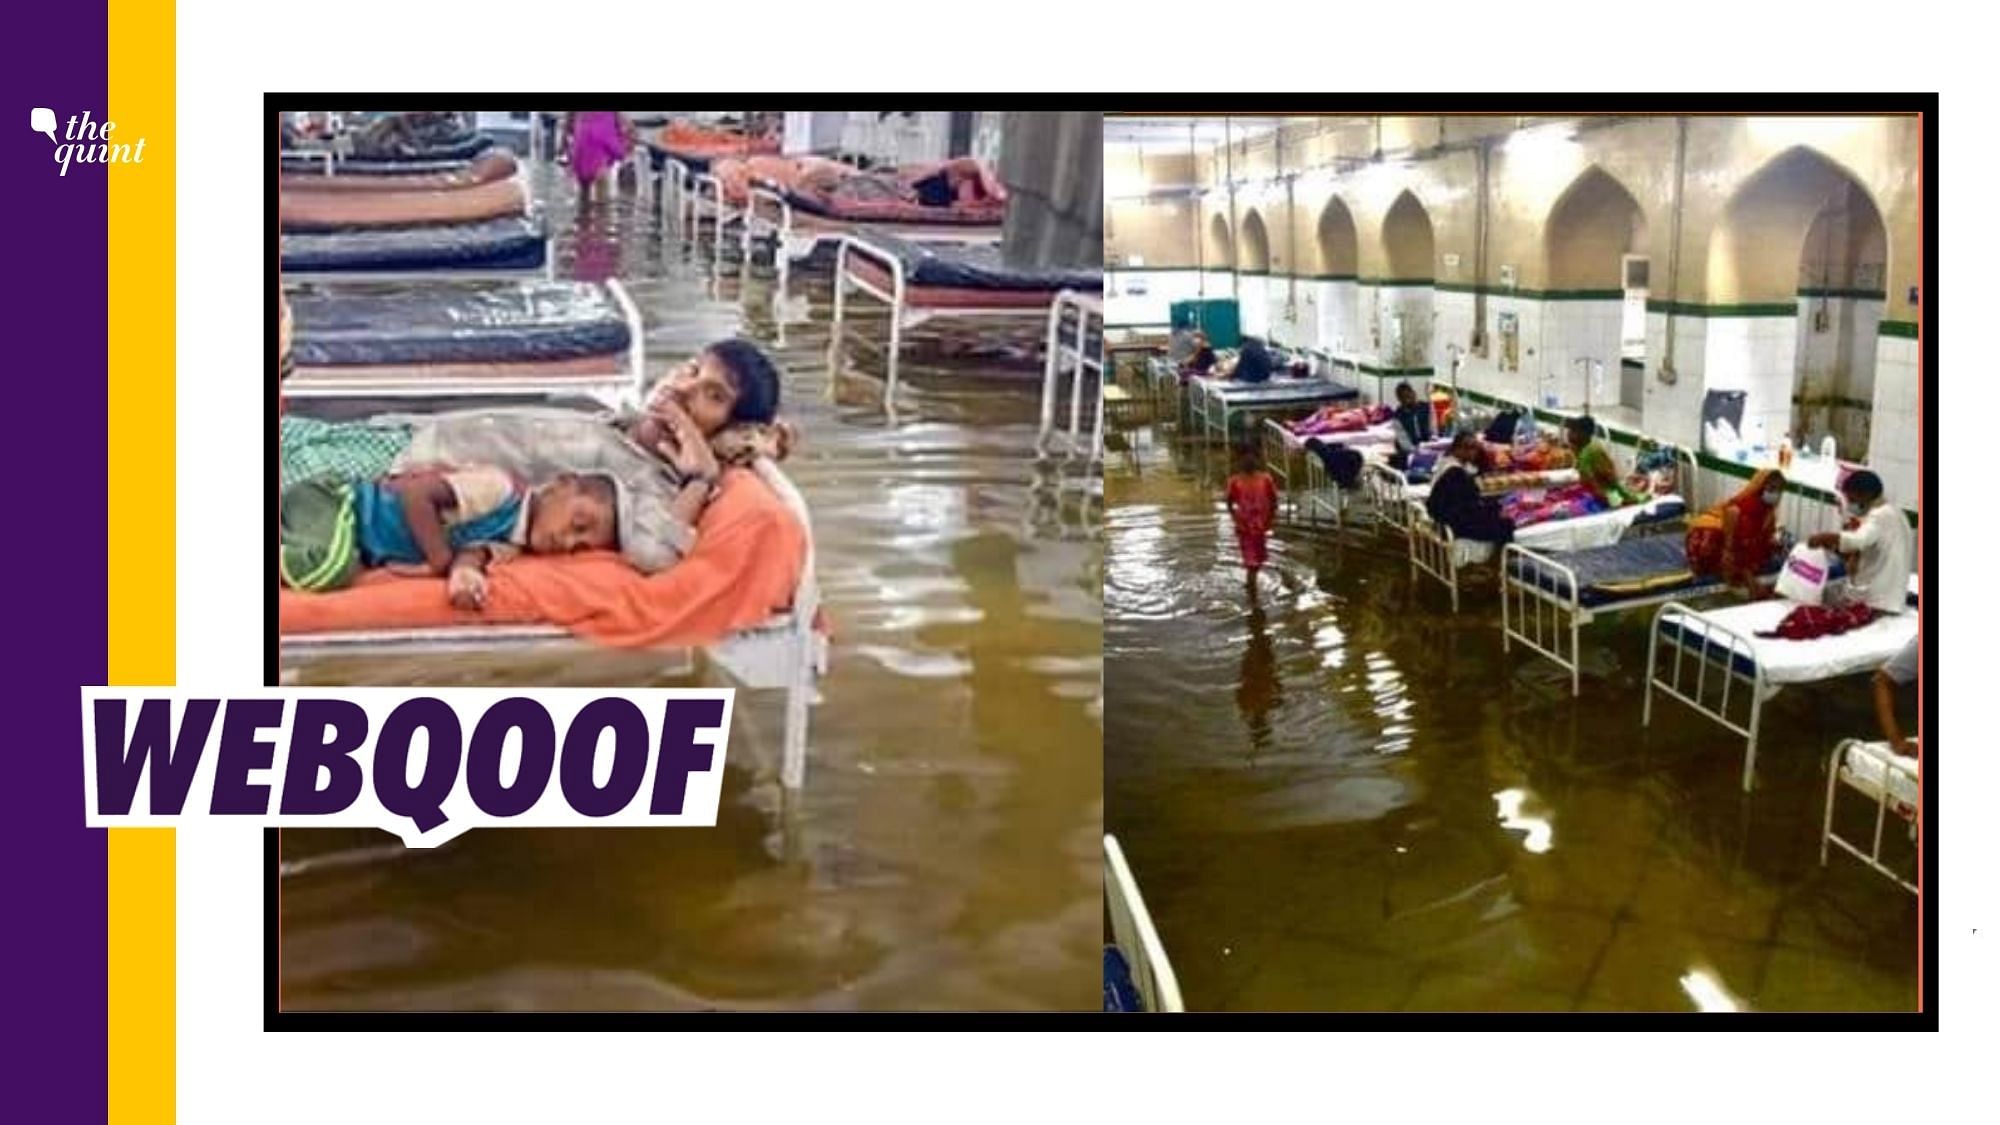 Old and unrelated images are being circulated to claim that they show the situation of flooded COVID wards in Bihar.